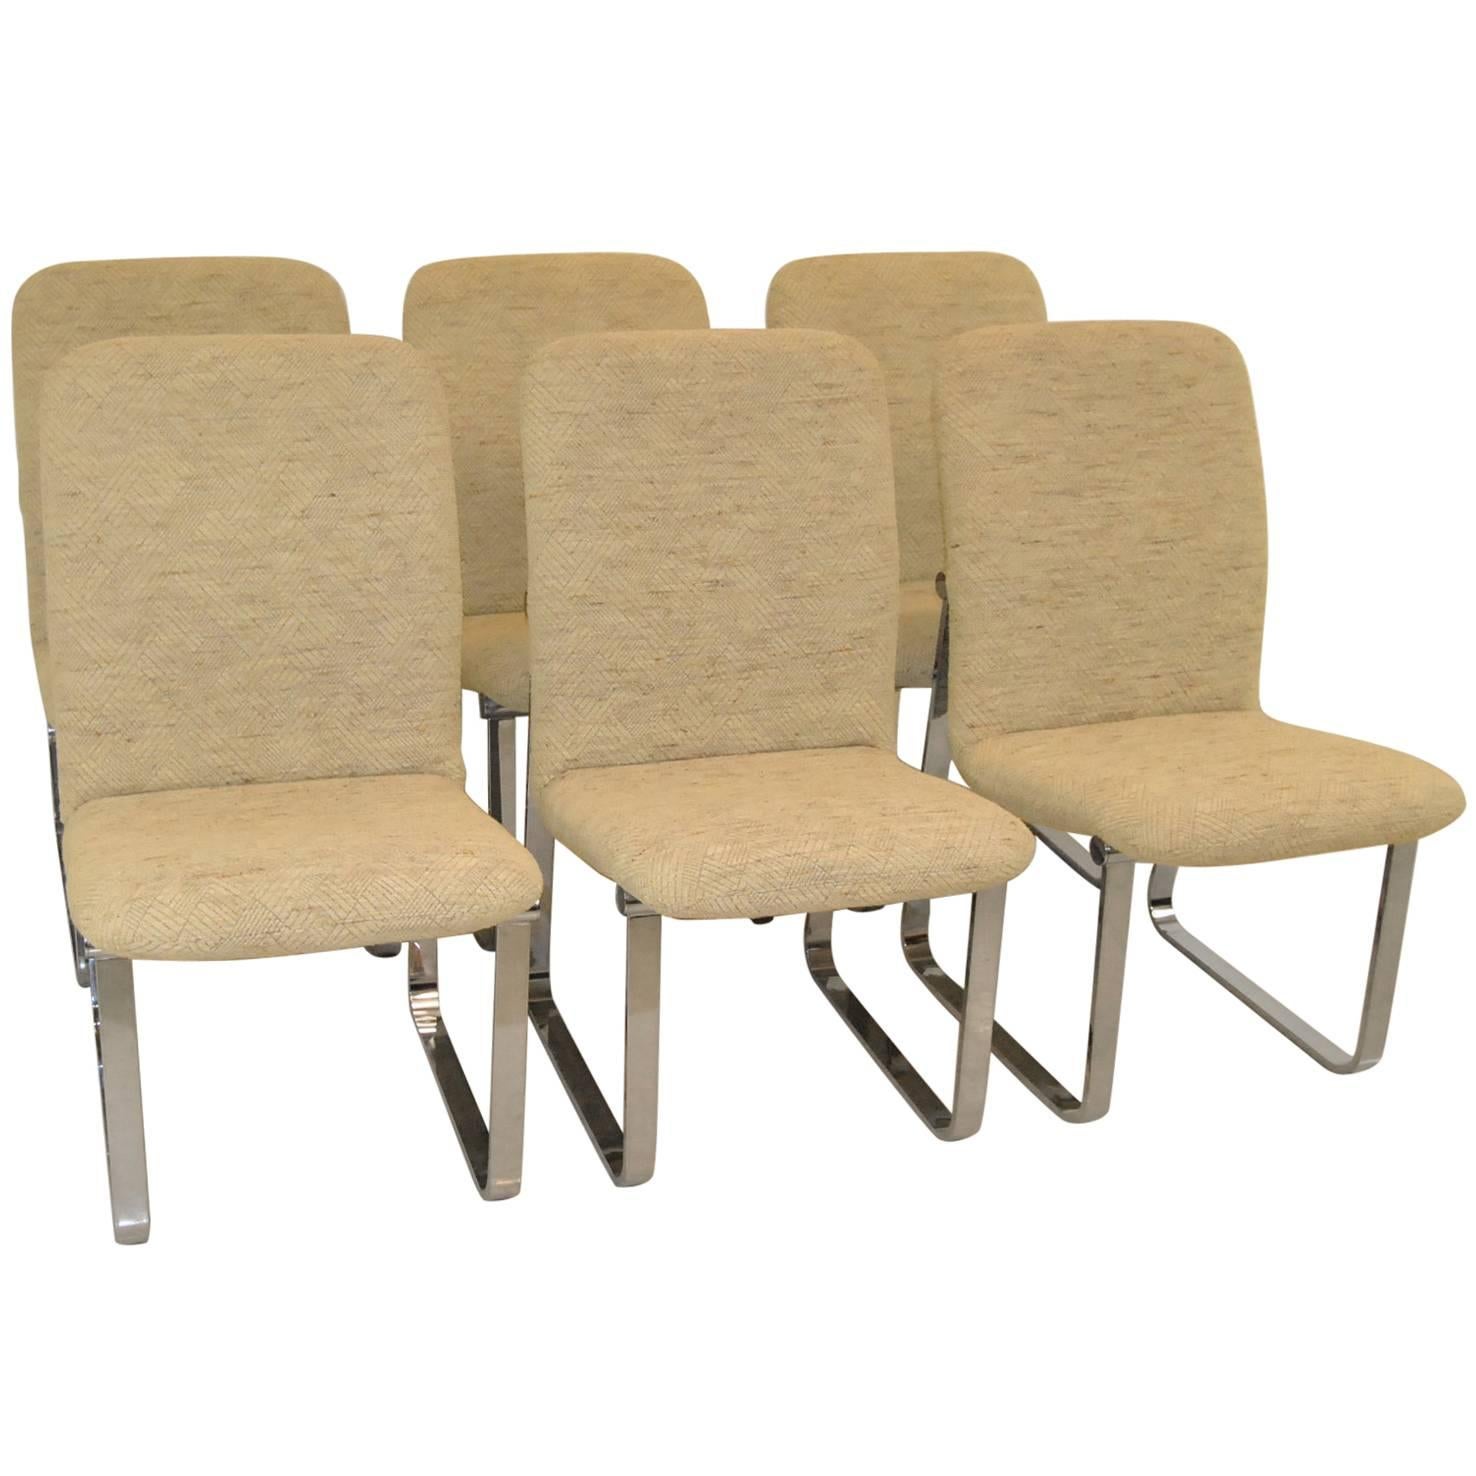 Six Mid-Century Modern DIA Chrome & Upholstery Dining Room Chairs